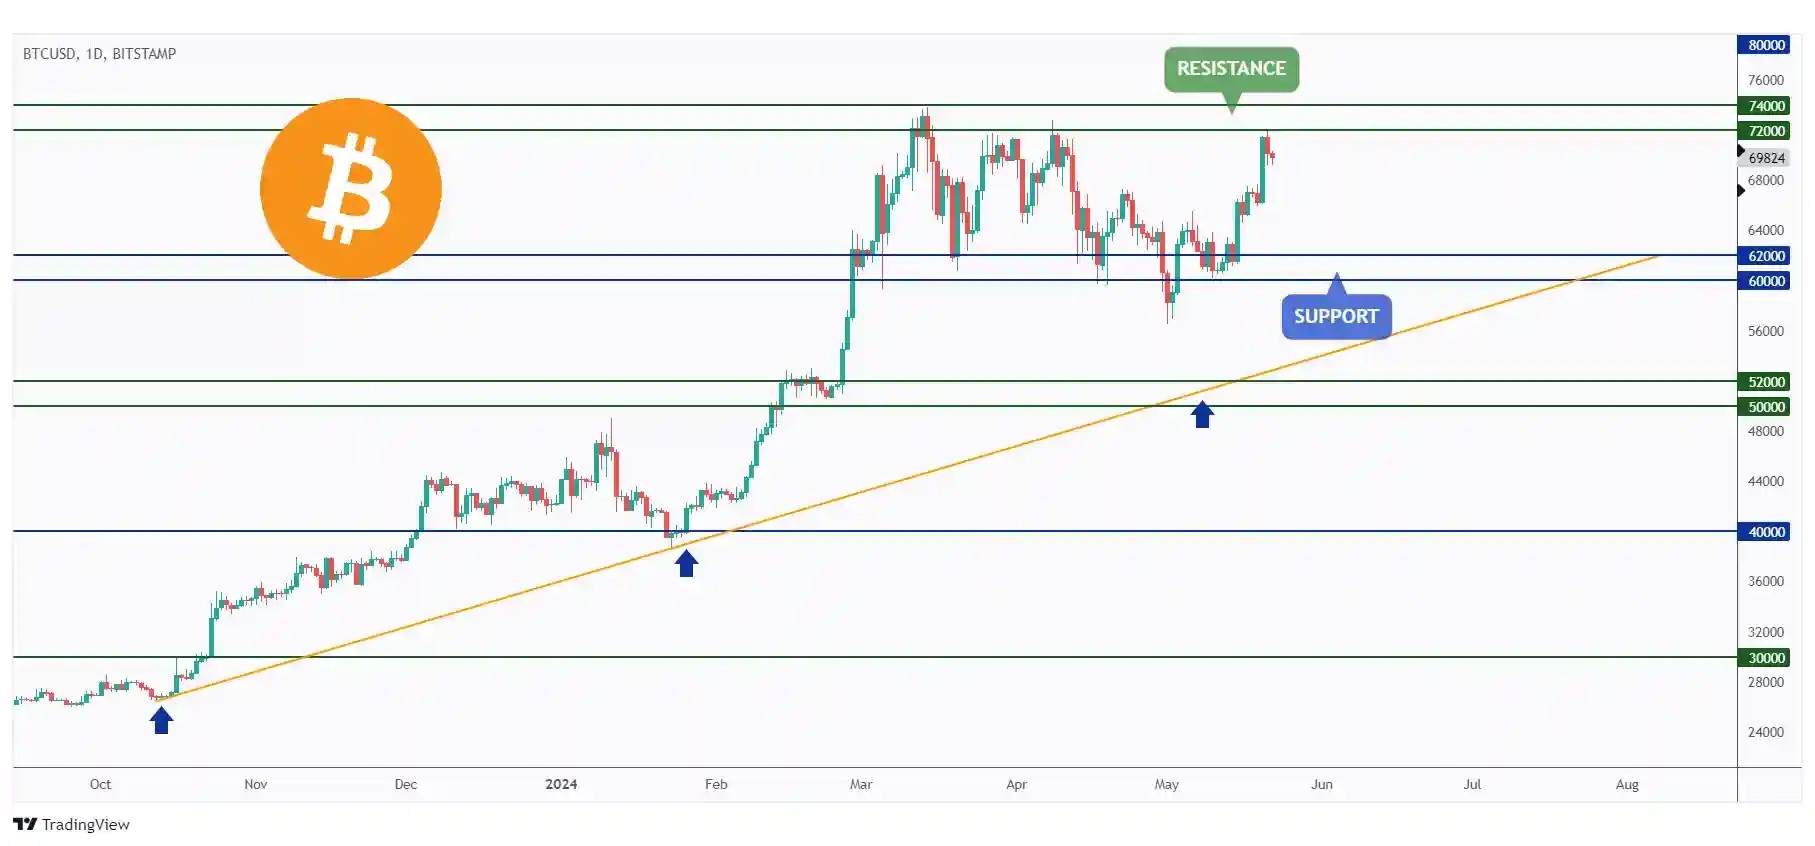 BTC daily chart approaching its previous all-time high at $74,000.